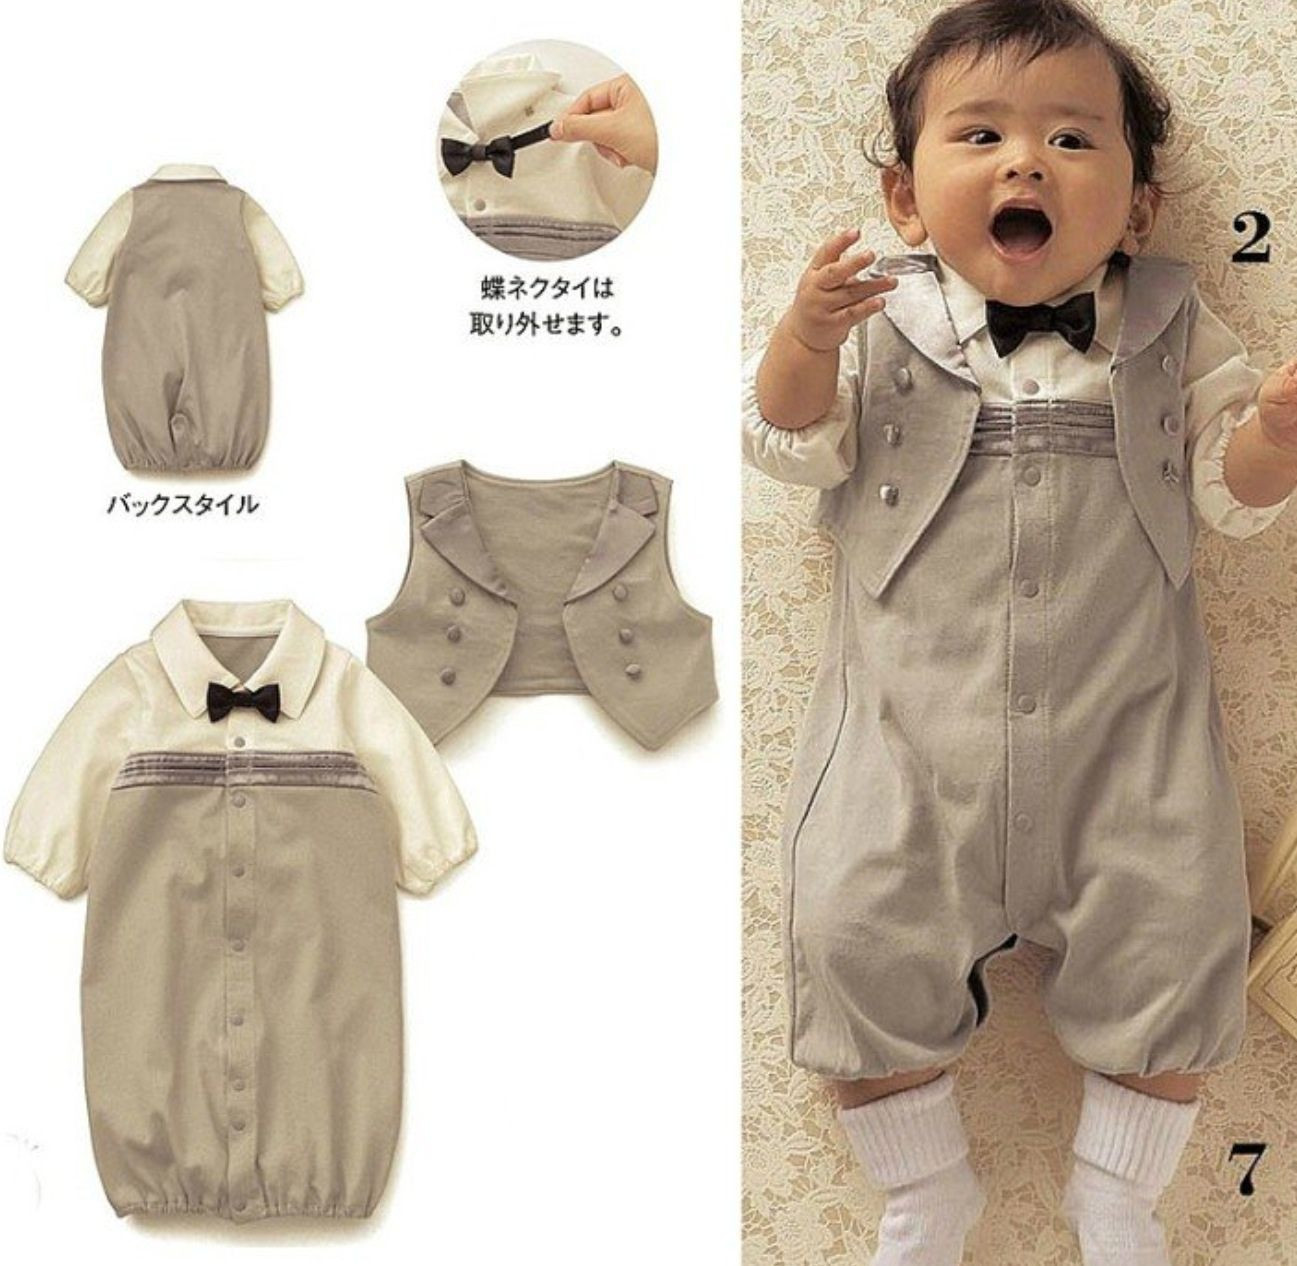 Old Fashion Baby Clothes
 Old fashioned boys